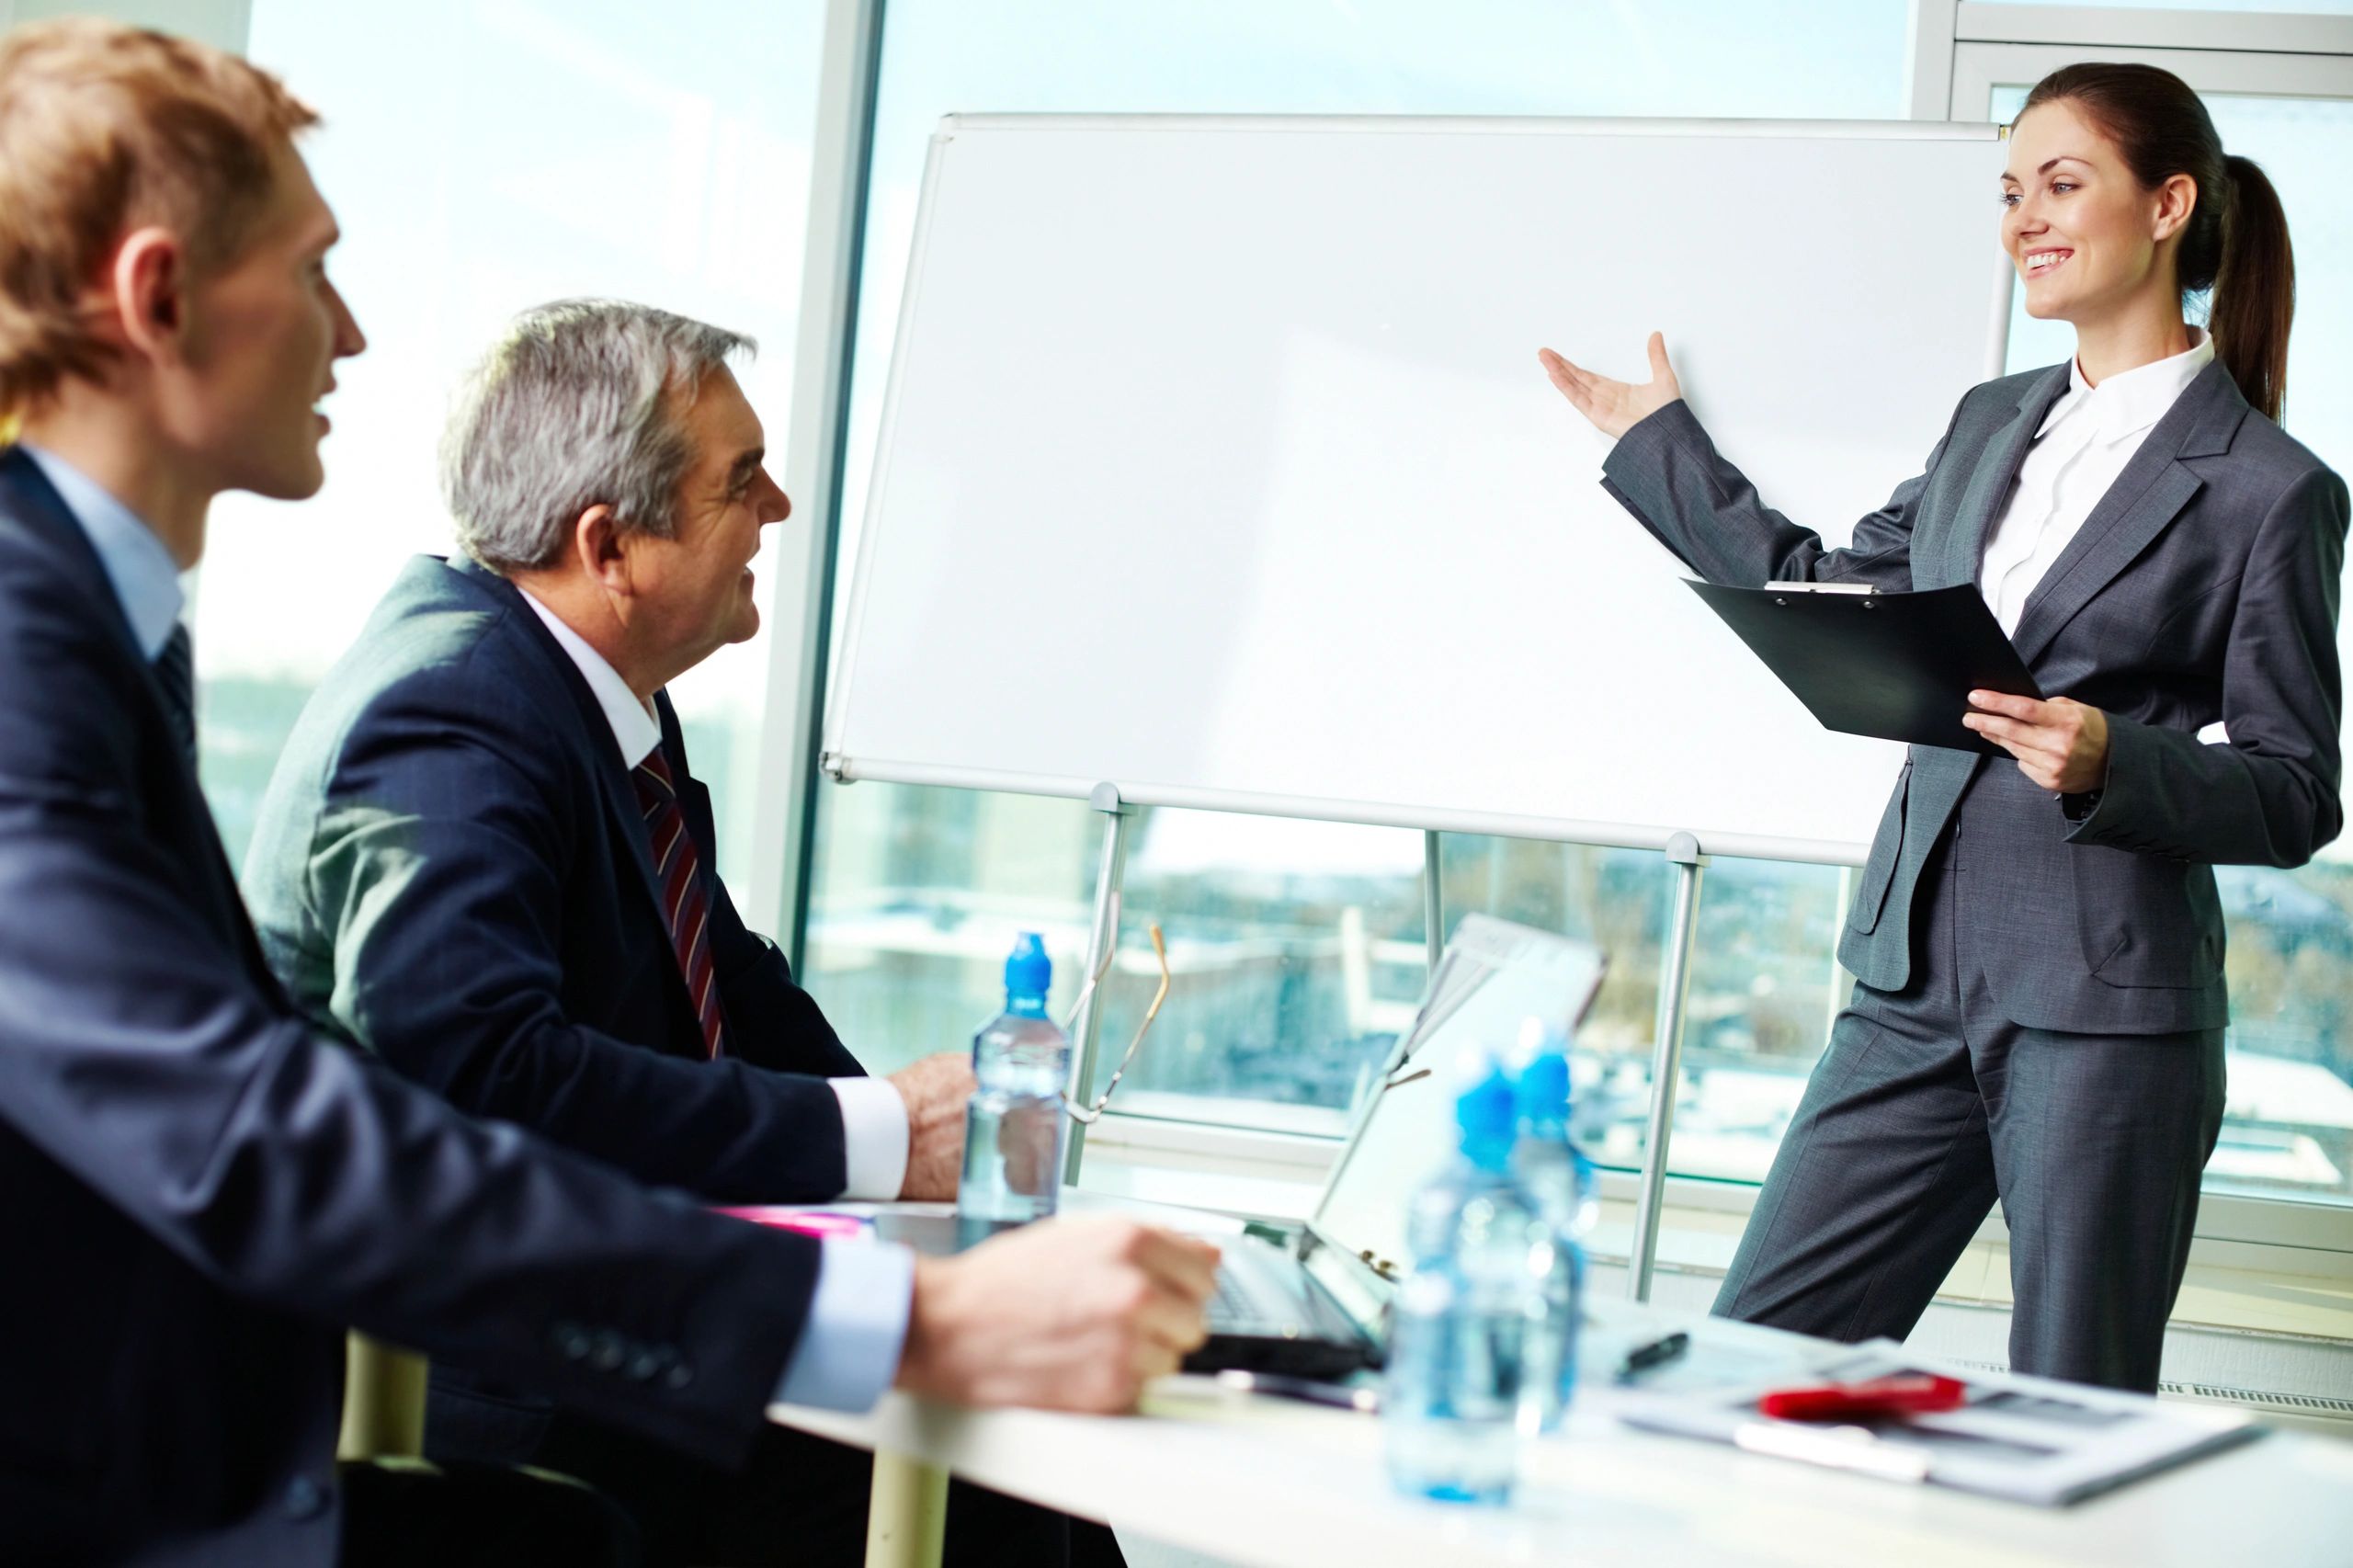 typically business presentations are expected to be delivered extemporaneously